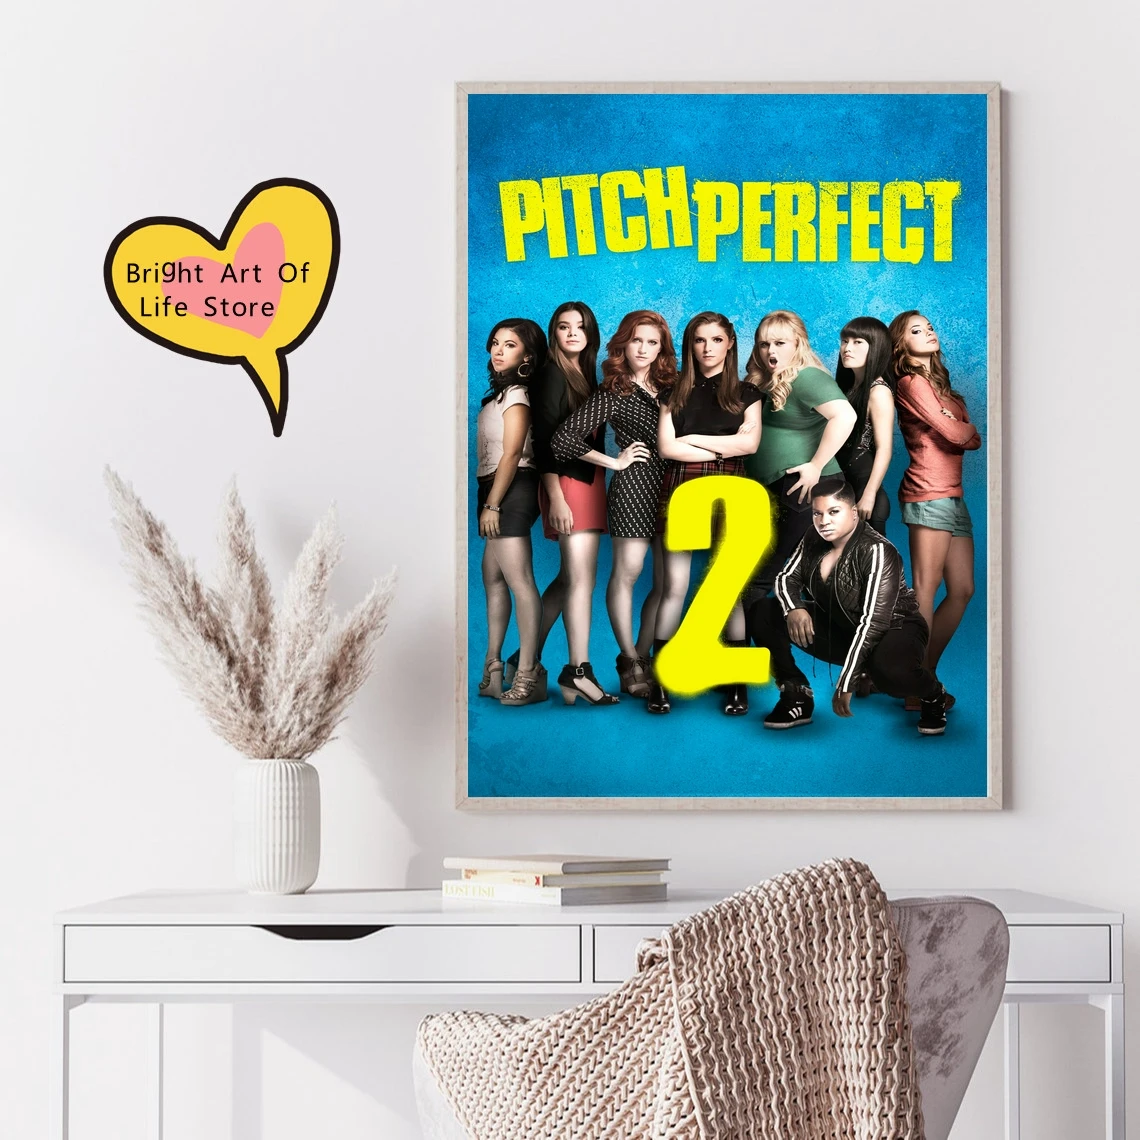 

Pitch Perfect 2 (2015) Movie Poster Cover Photo Print Canvas Wall Art Home Decor (Unframed)